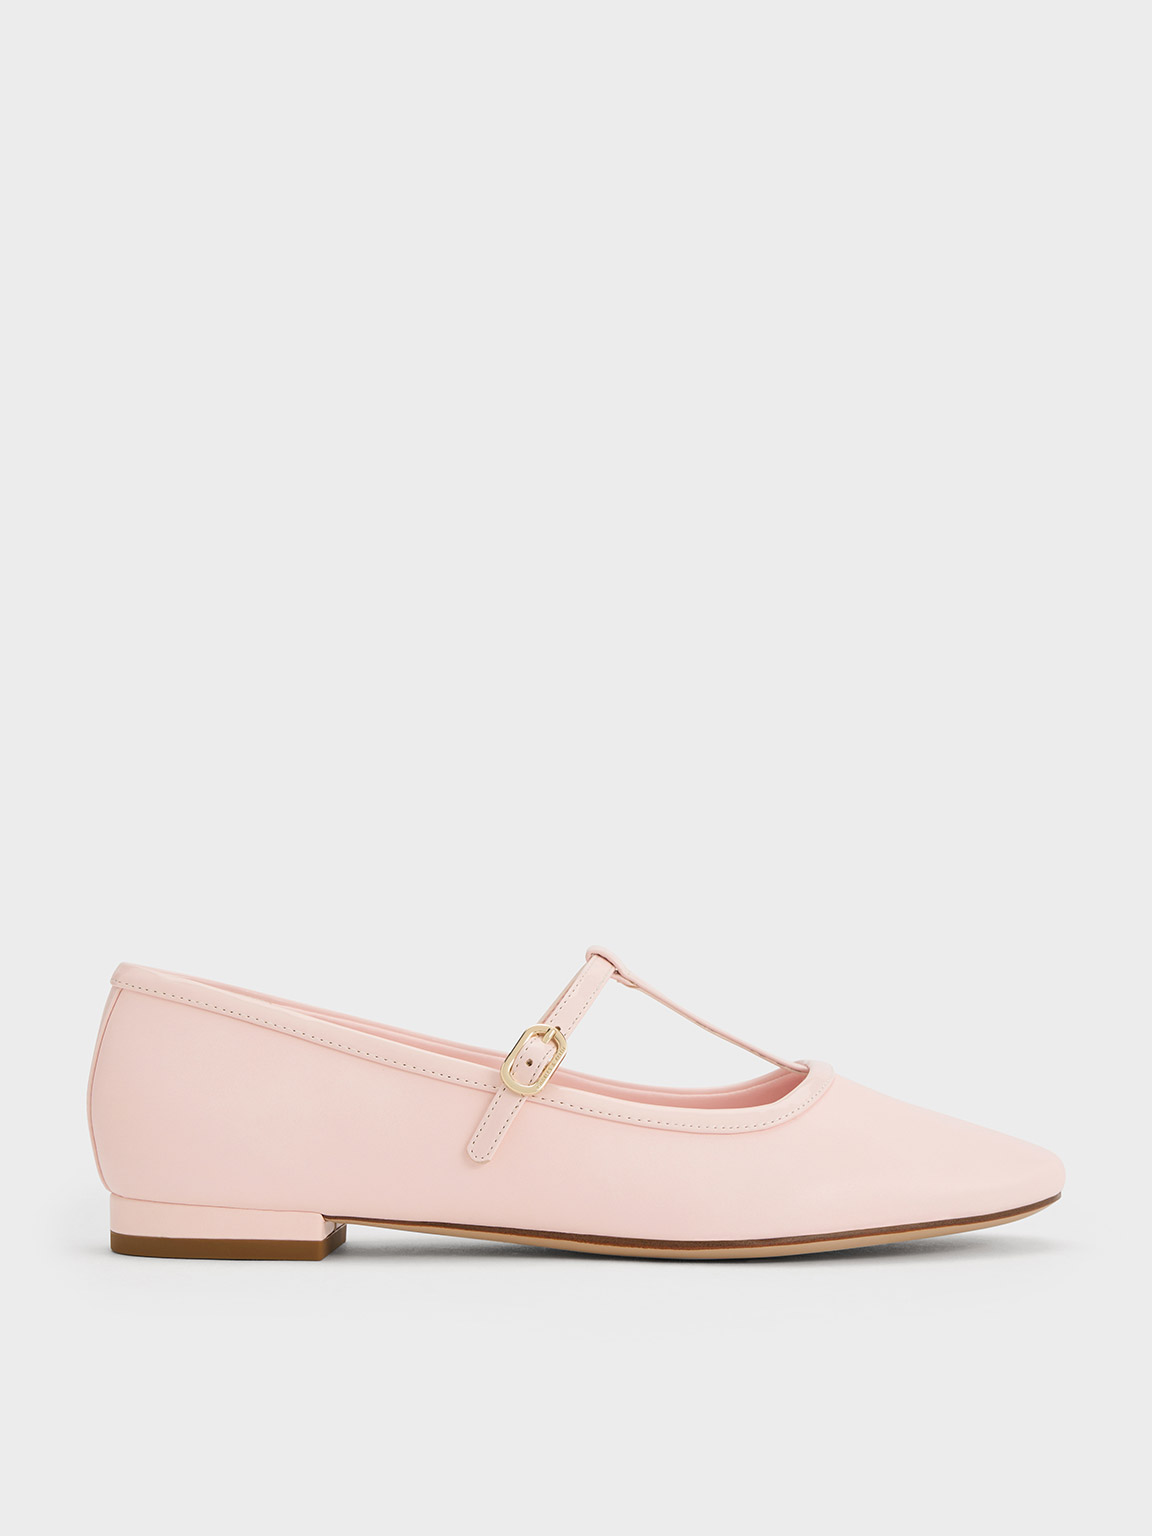 The Square Mary Jane in Soiree Pink, Women's Shoes